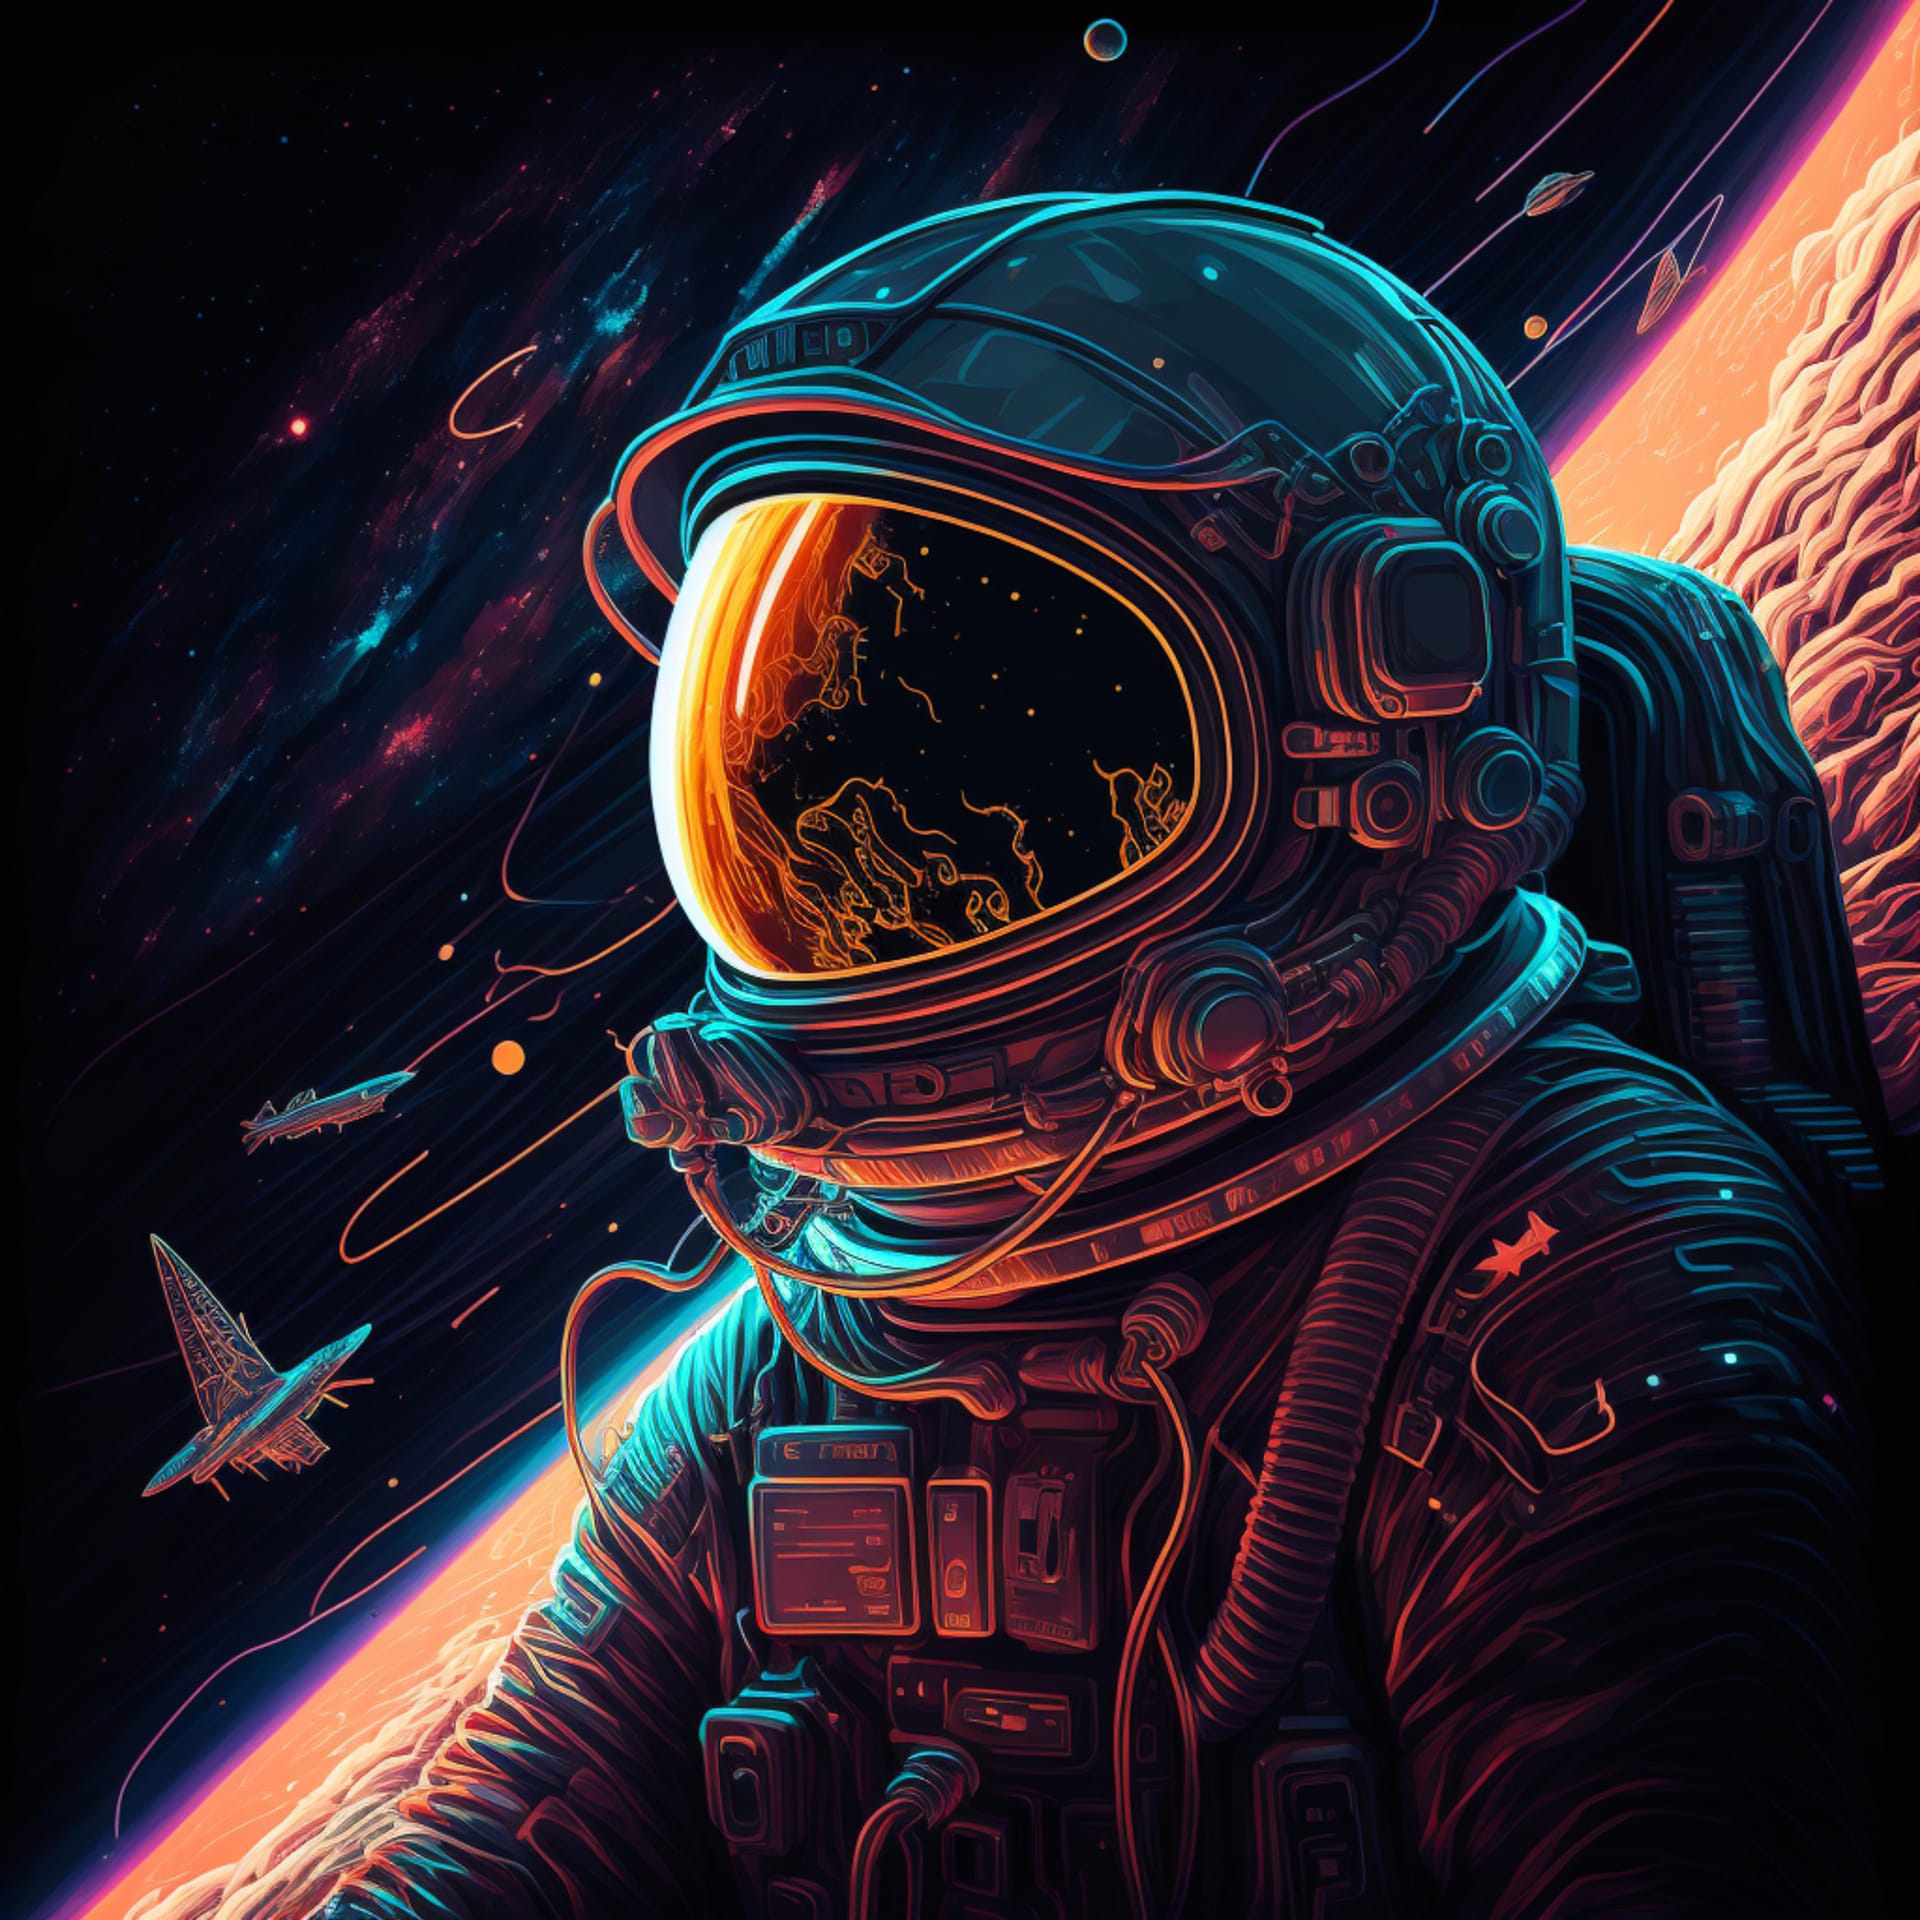 Astronaut outer space picture